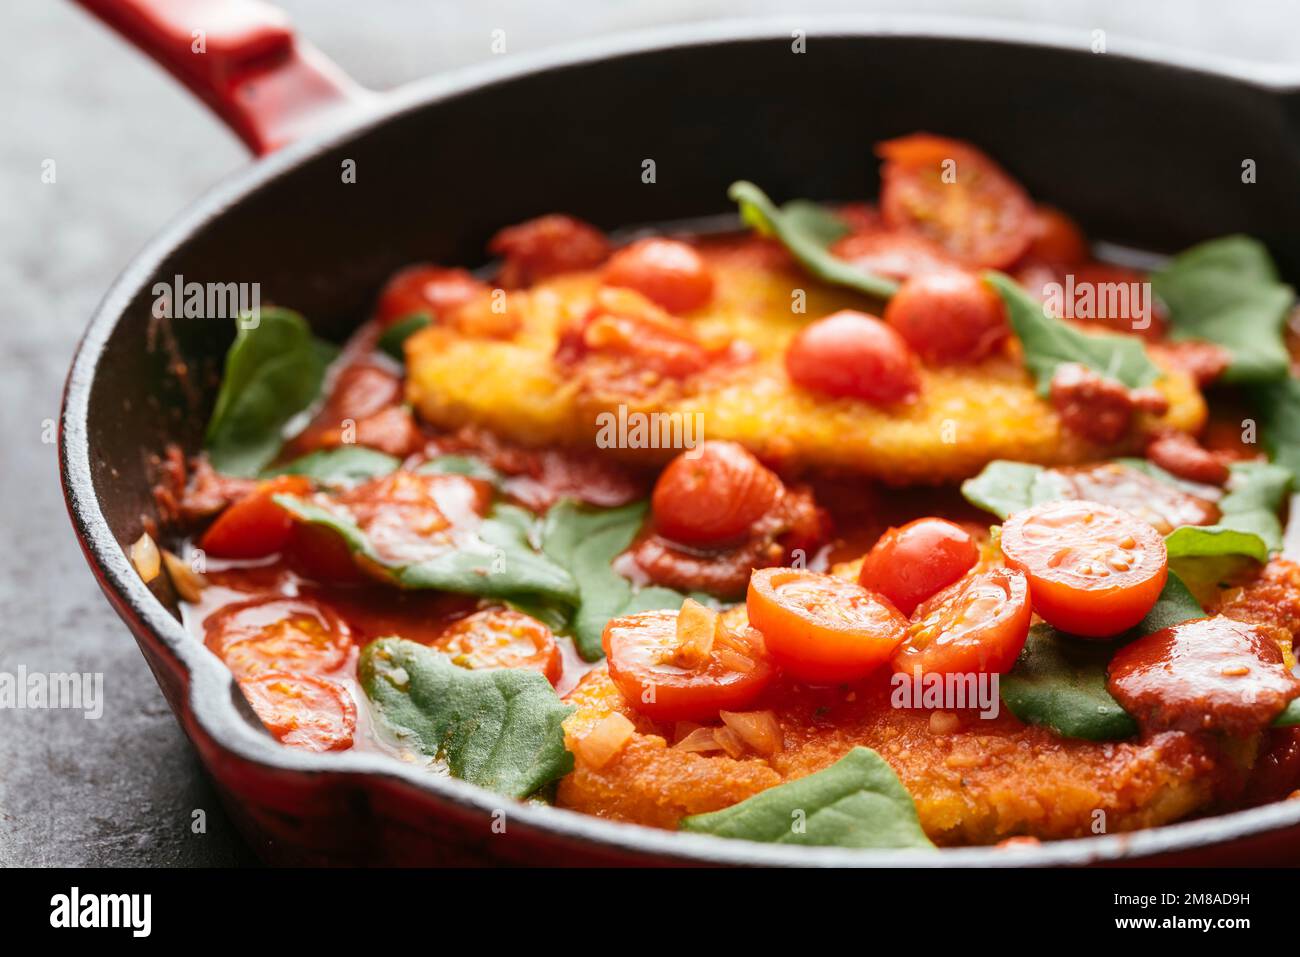 Vegan Chickun Fillets with Cherry Tomatoes and Spinach Stock Photo